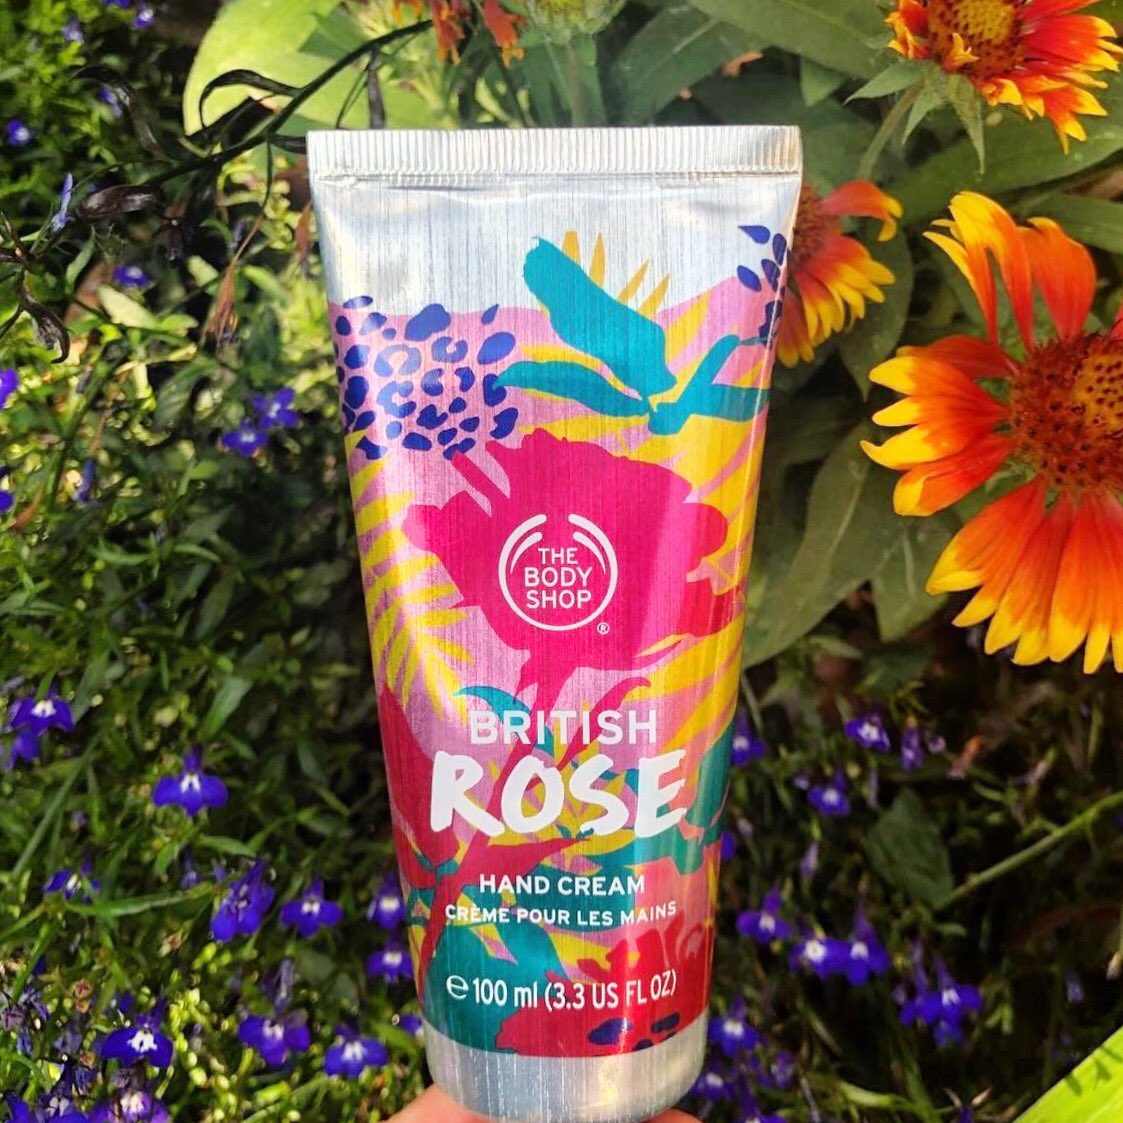 Today is #InternationalCharityDay . Pick up a tube or two of the limited edition British Rose hand cream 🌹For every product sold, @thebodyshop will donate to help protect wildlife and re-wild the world through their World Bio-Bridges Mission. #FightfortheWorld #RewildingtheWorld